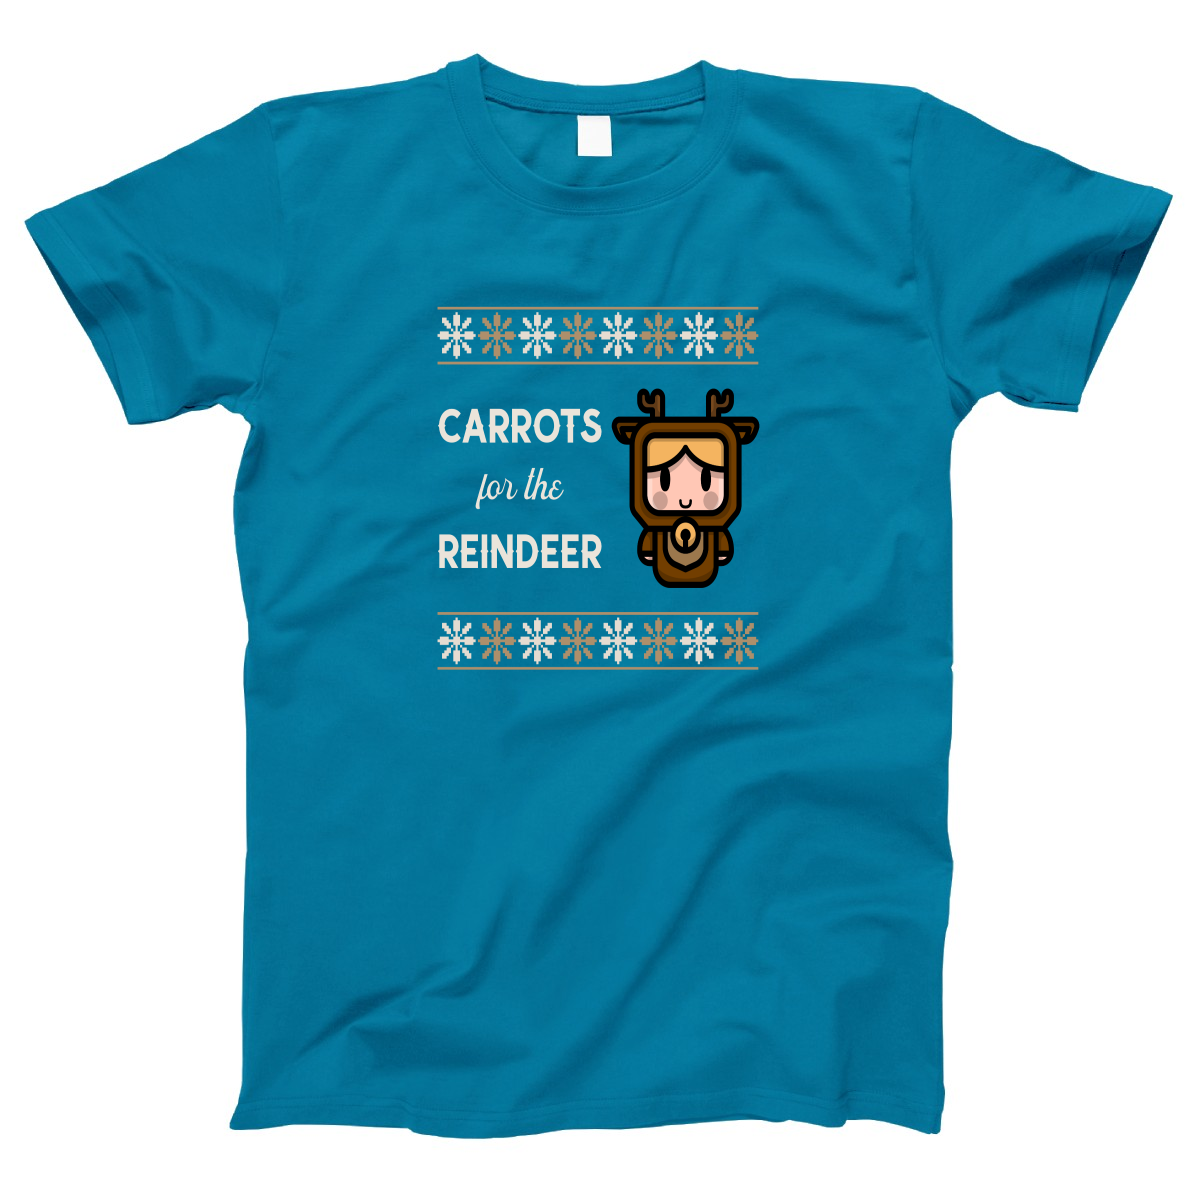 Carrots for the Reindeer Women's T-shirt | Turquoise